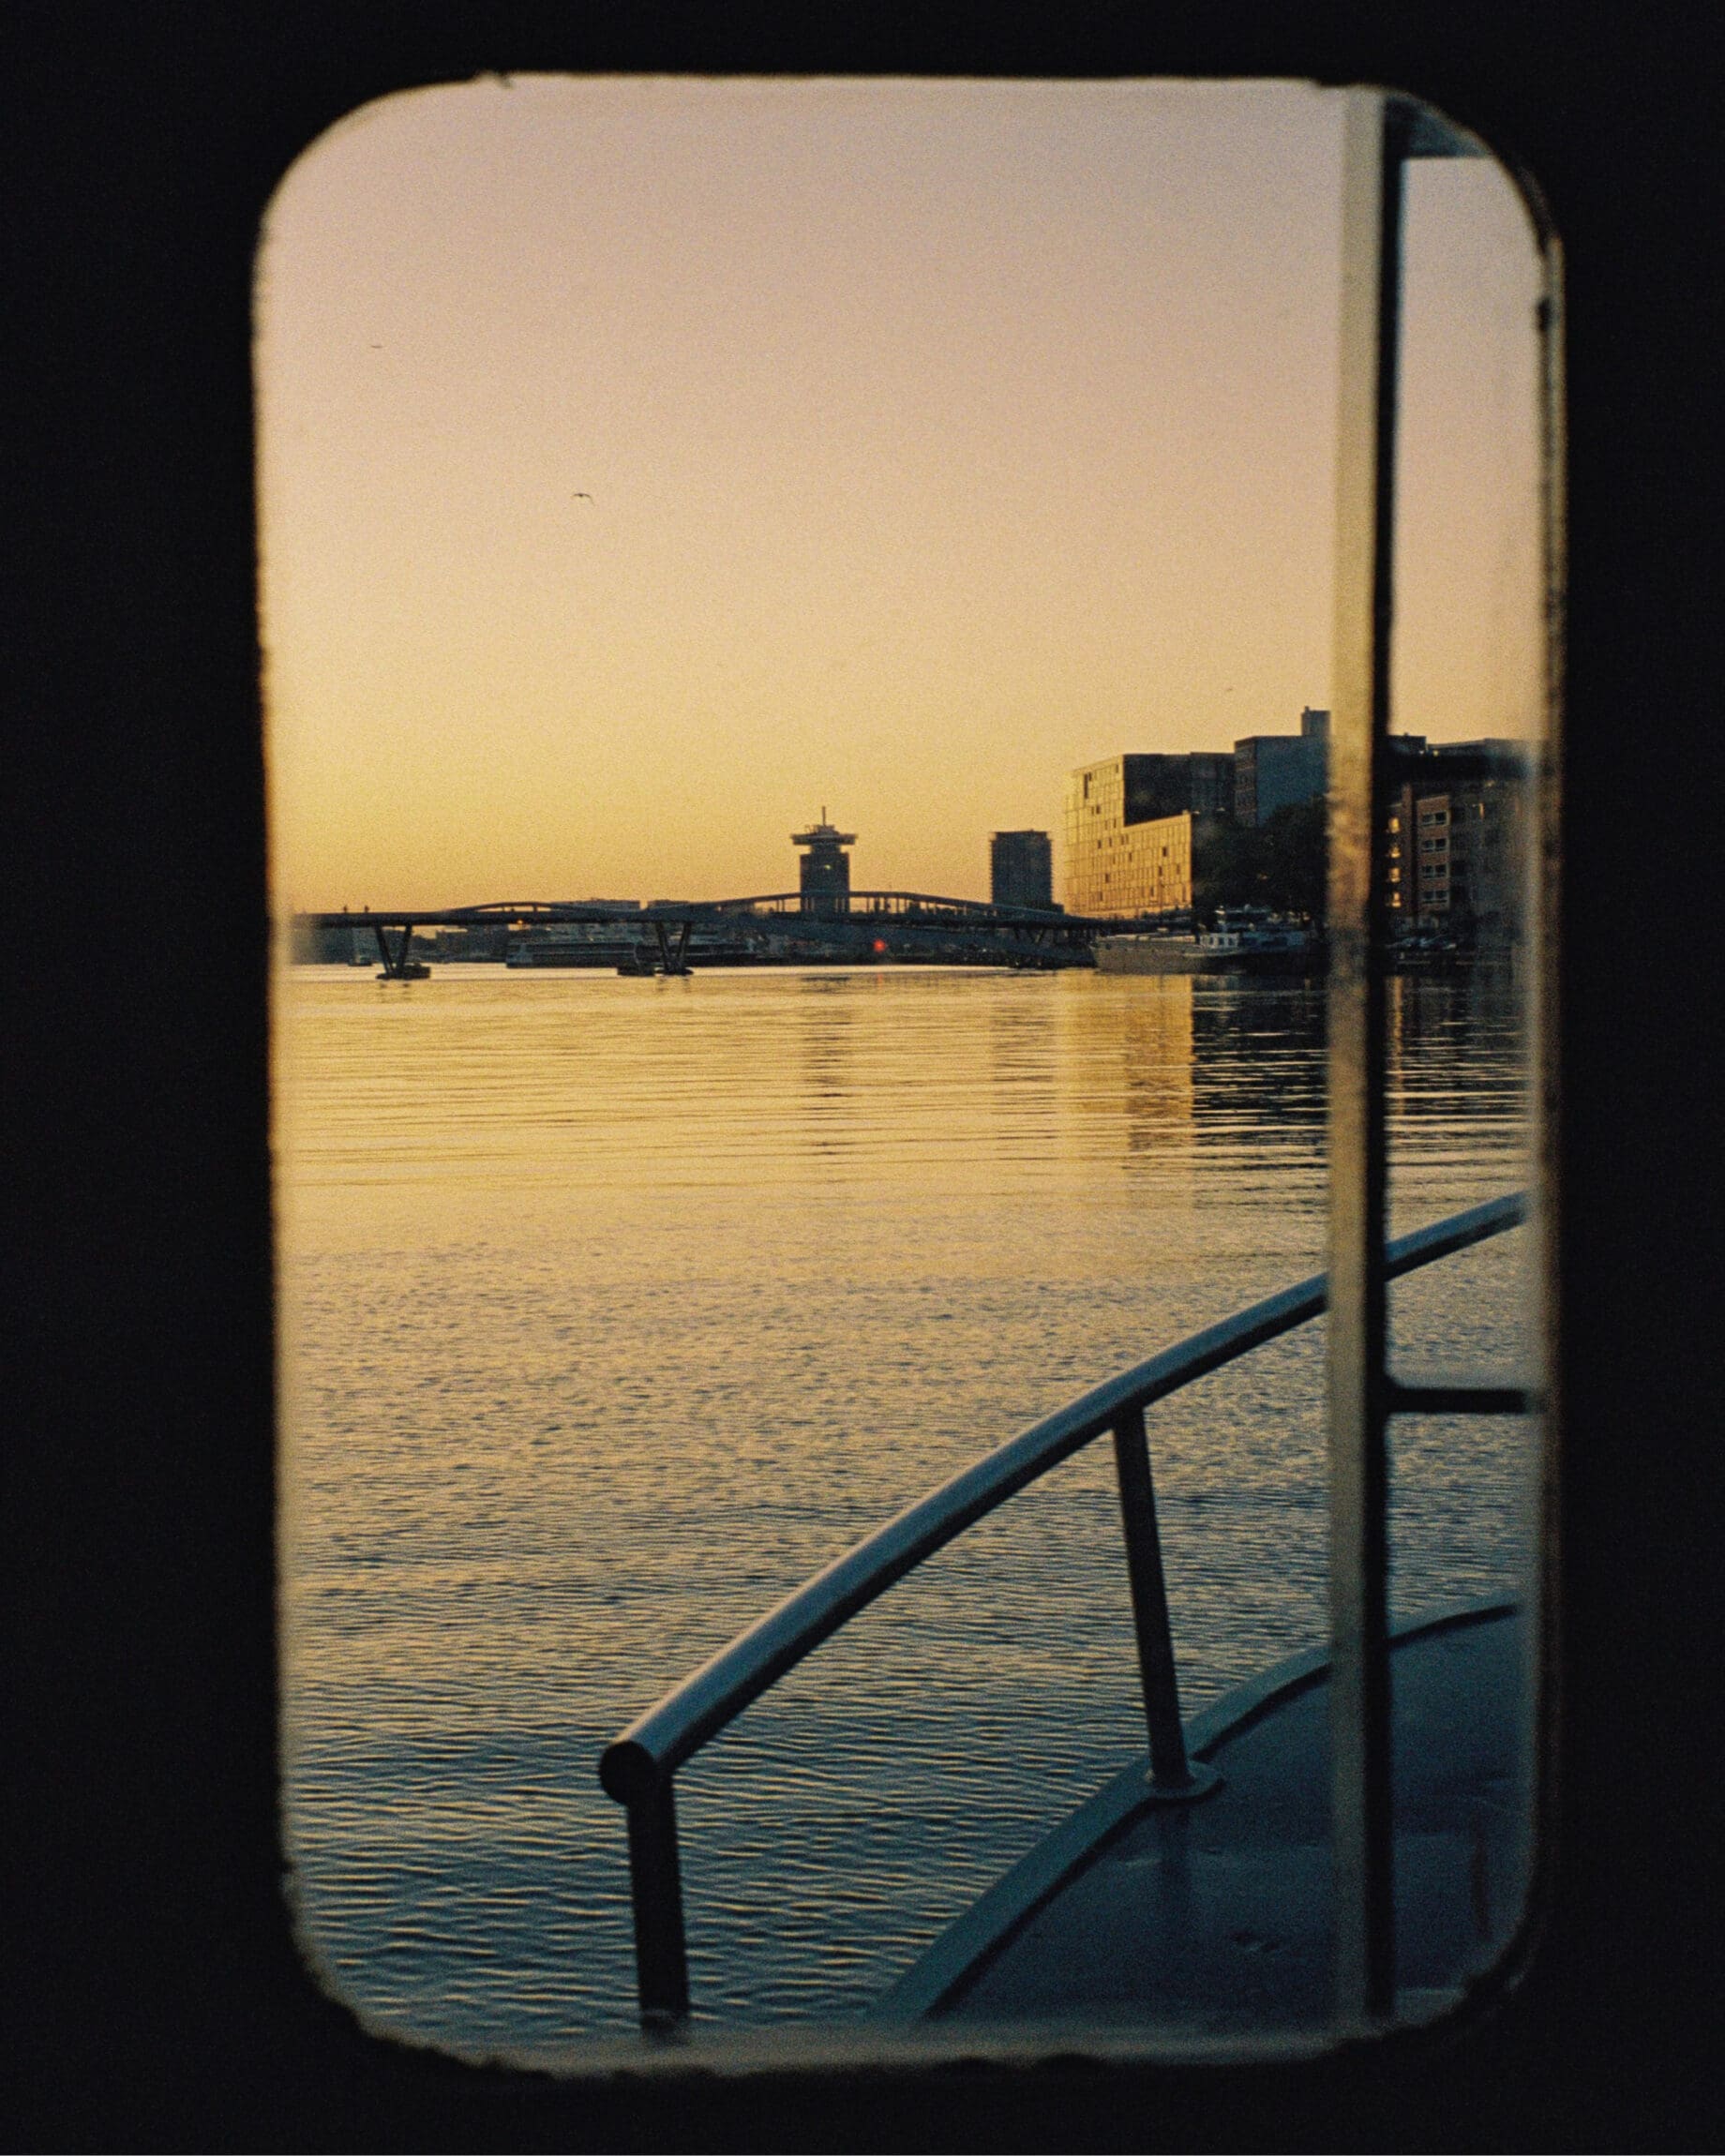 My city: Amsterdam | Boat window overlooks sun setting over eh waterfront.